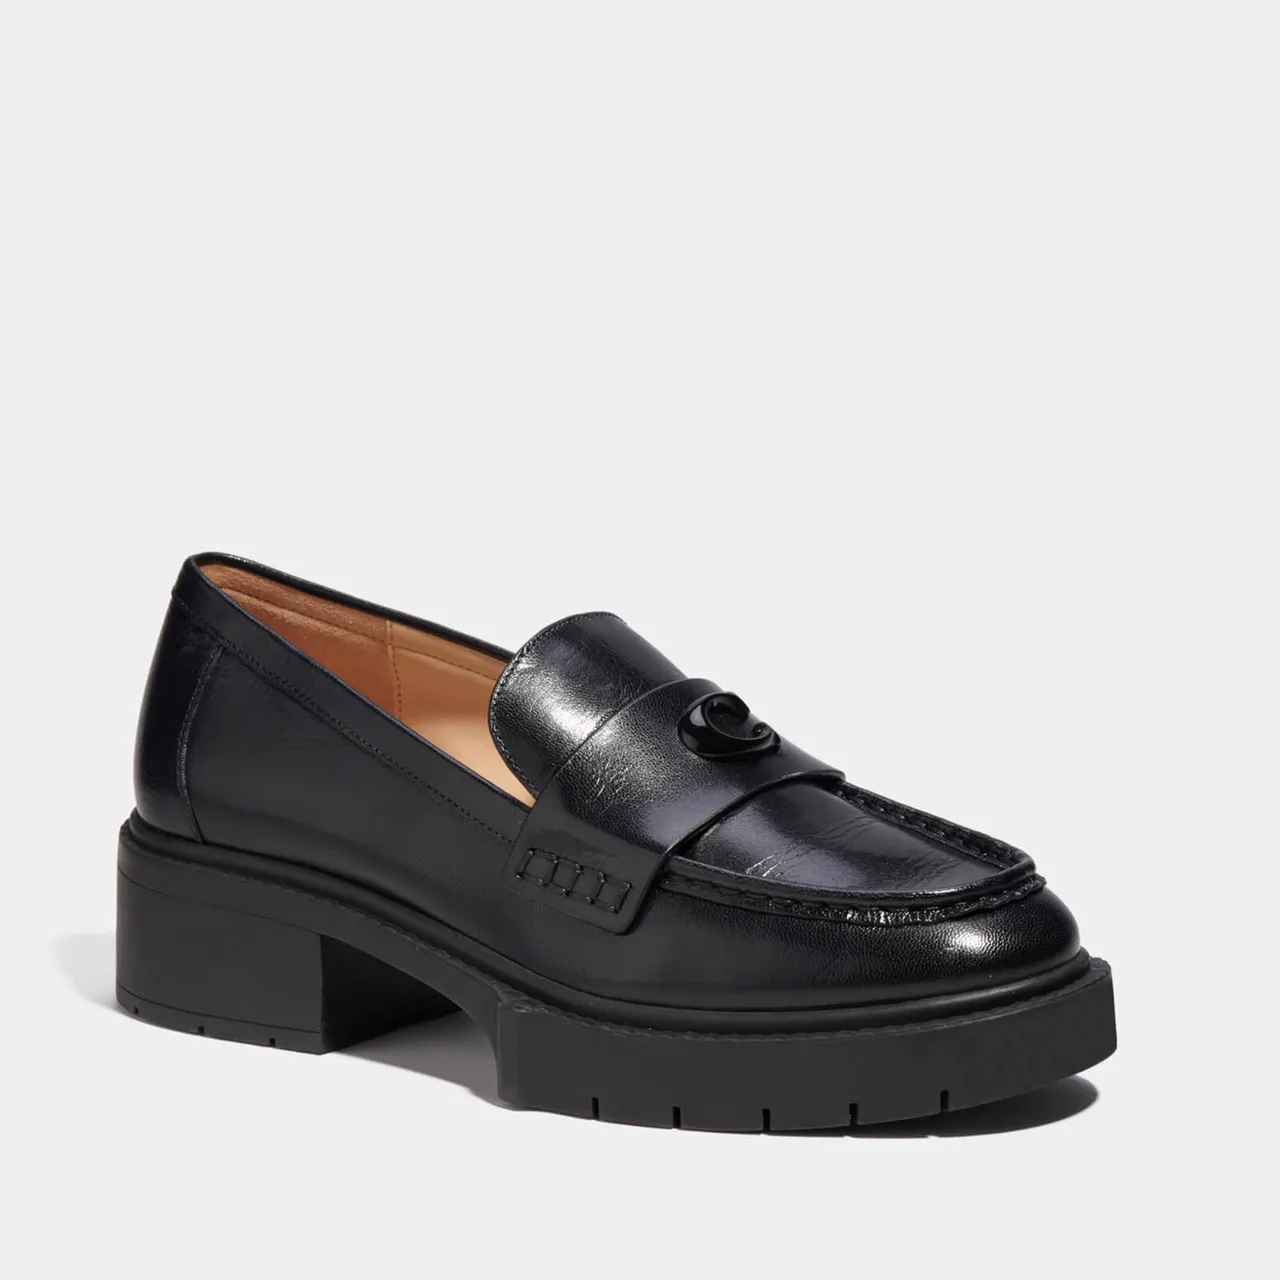 Coach Leah Leather Loafers - UK